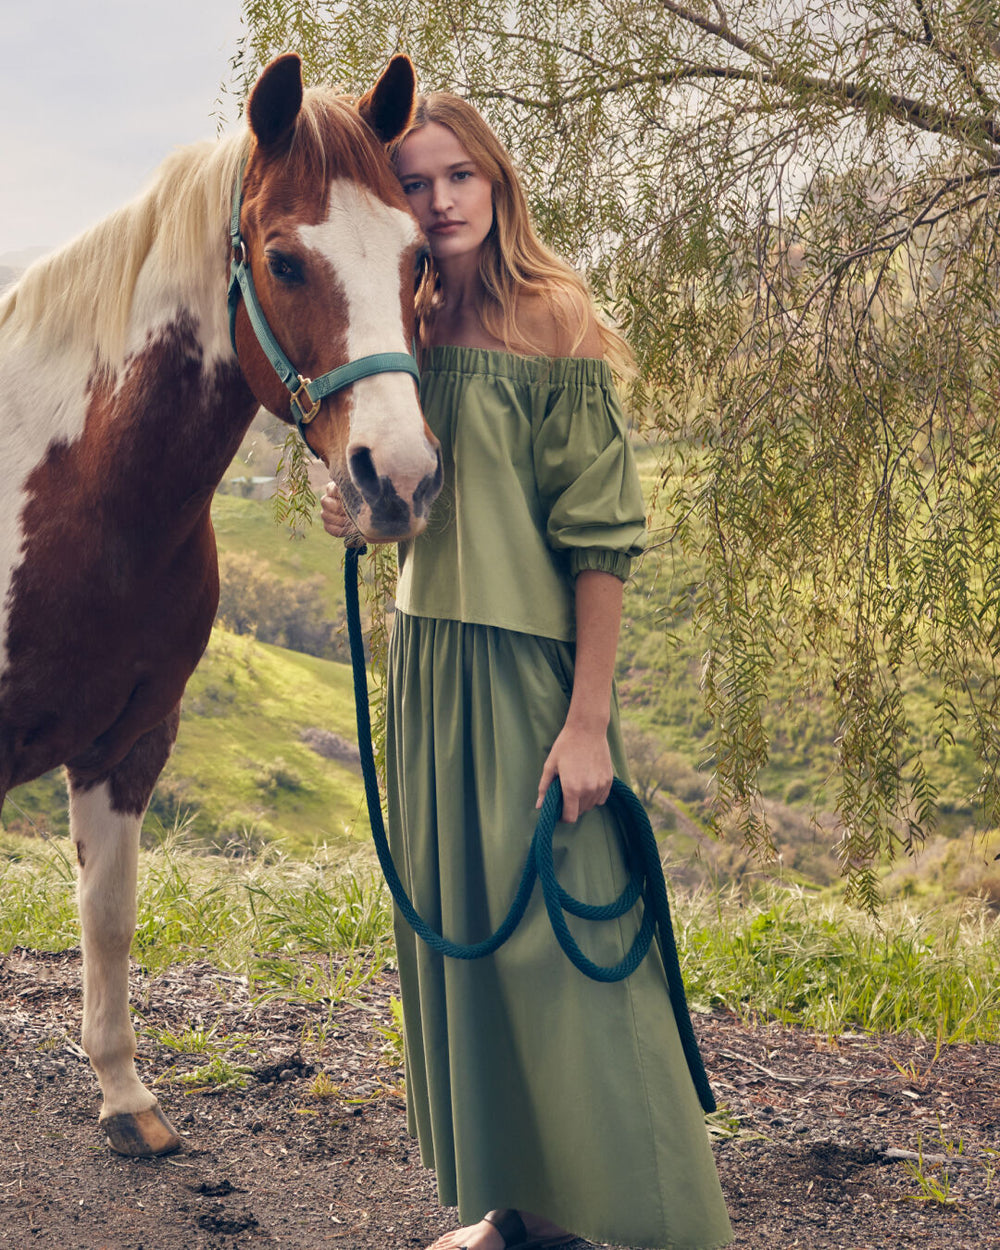 Woman standing next to a horse outdoors.